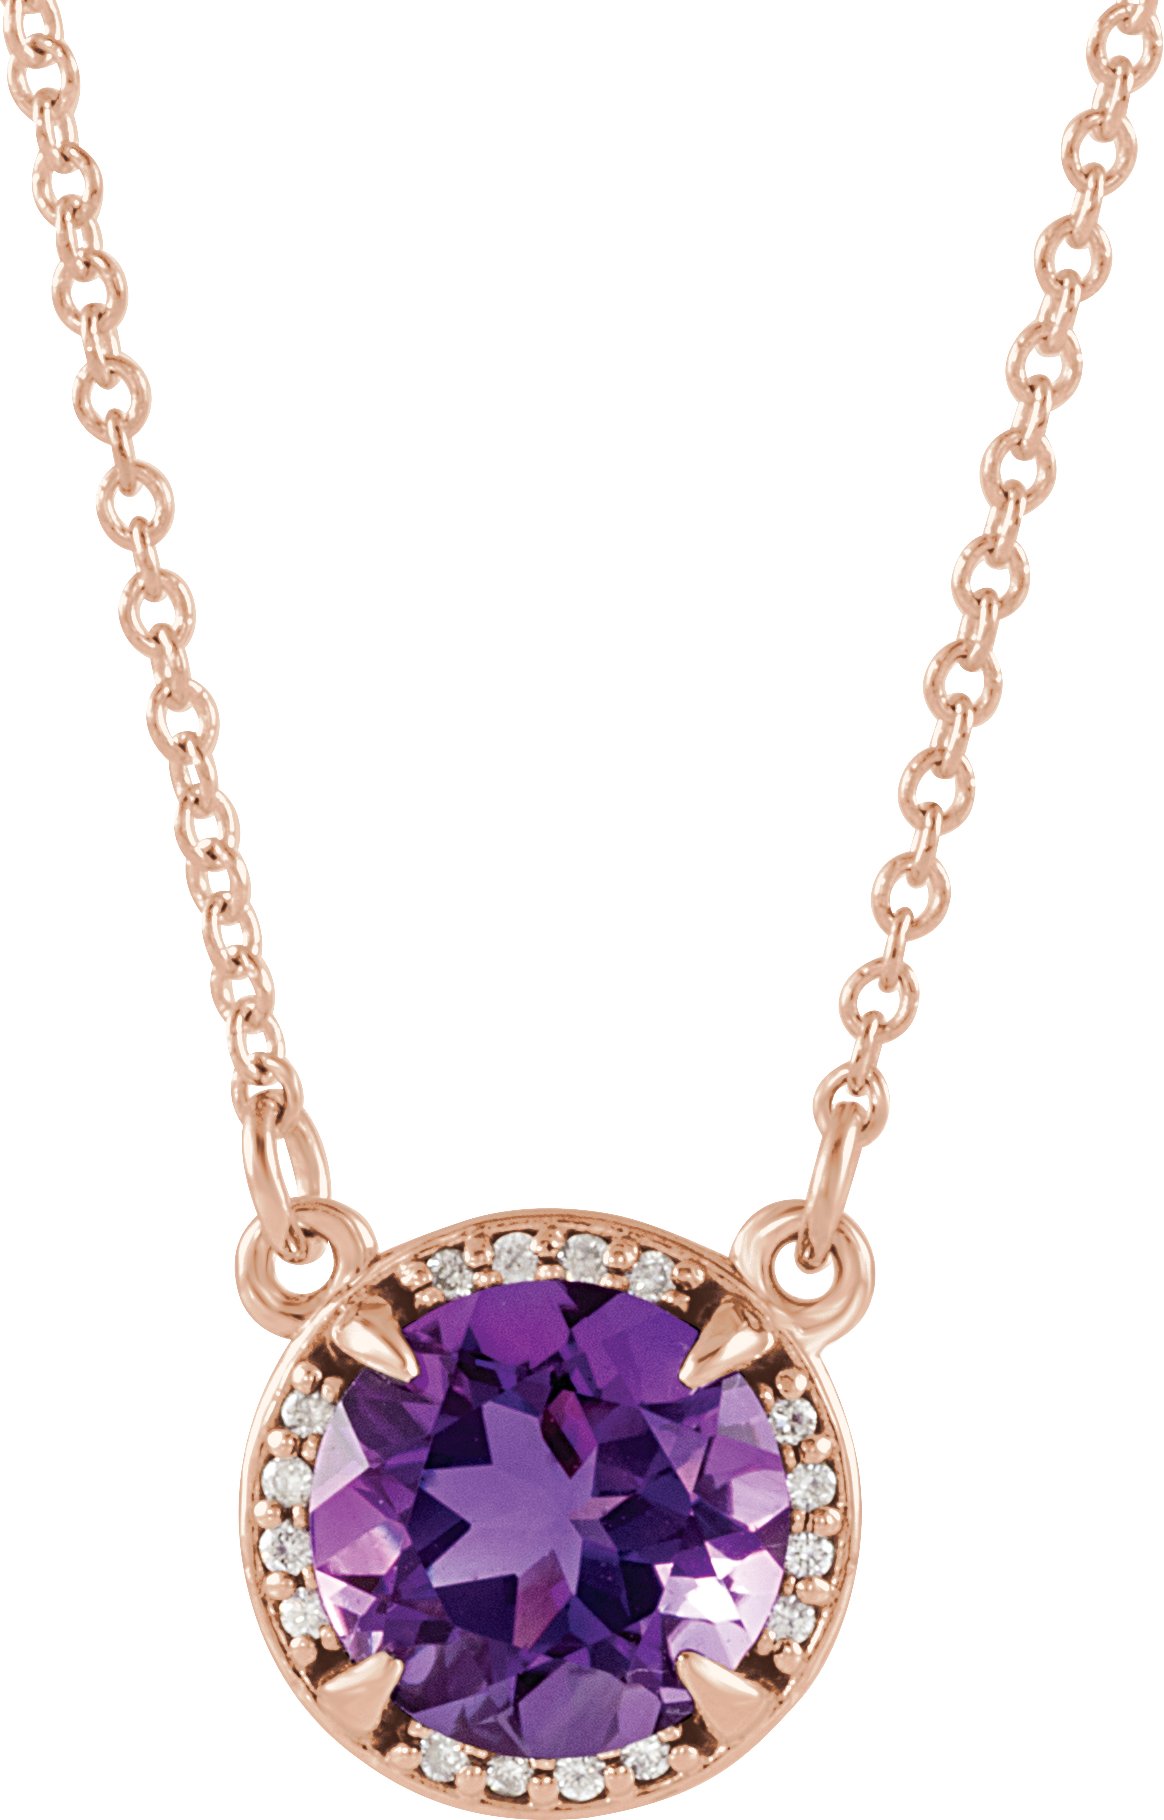 14K Rose 6 mm Round Amethyst and .04 CTW Diamond 16 inch Necklace Ref 13127109